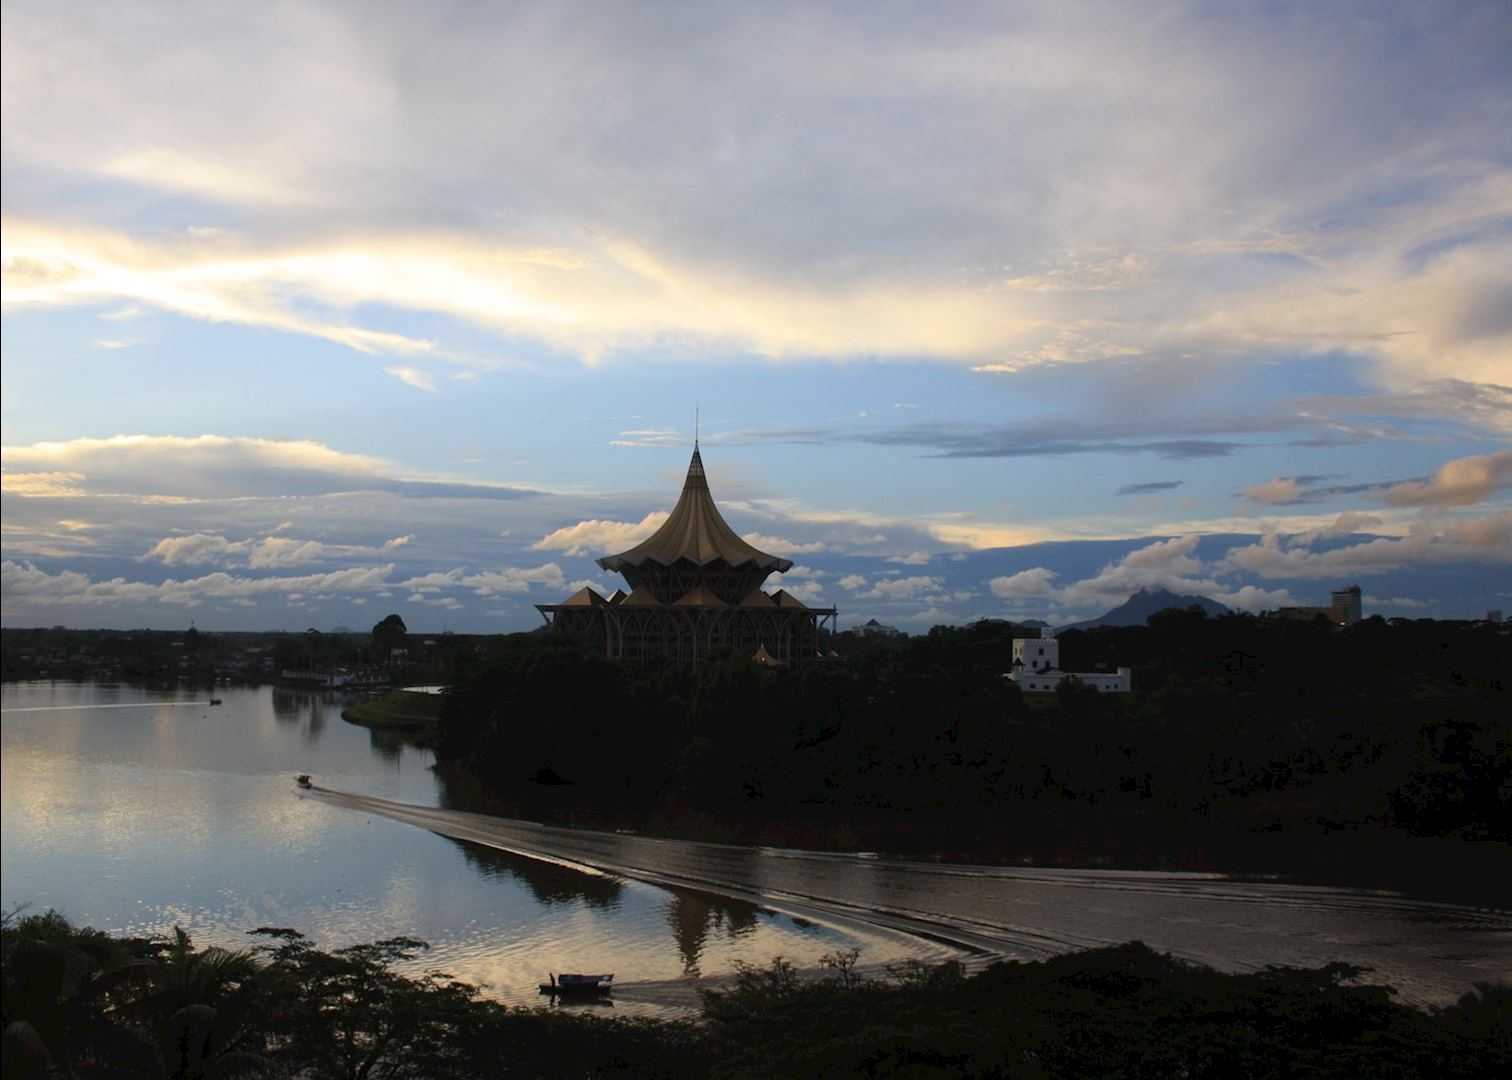 Visit Kuching on a trip to Borneo | Audley Travel